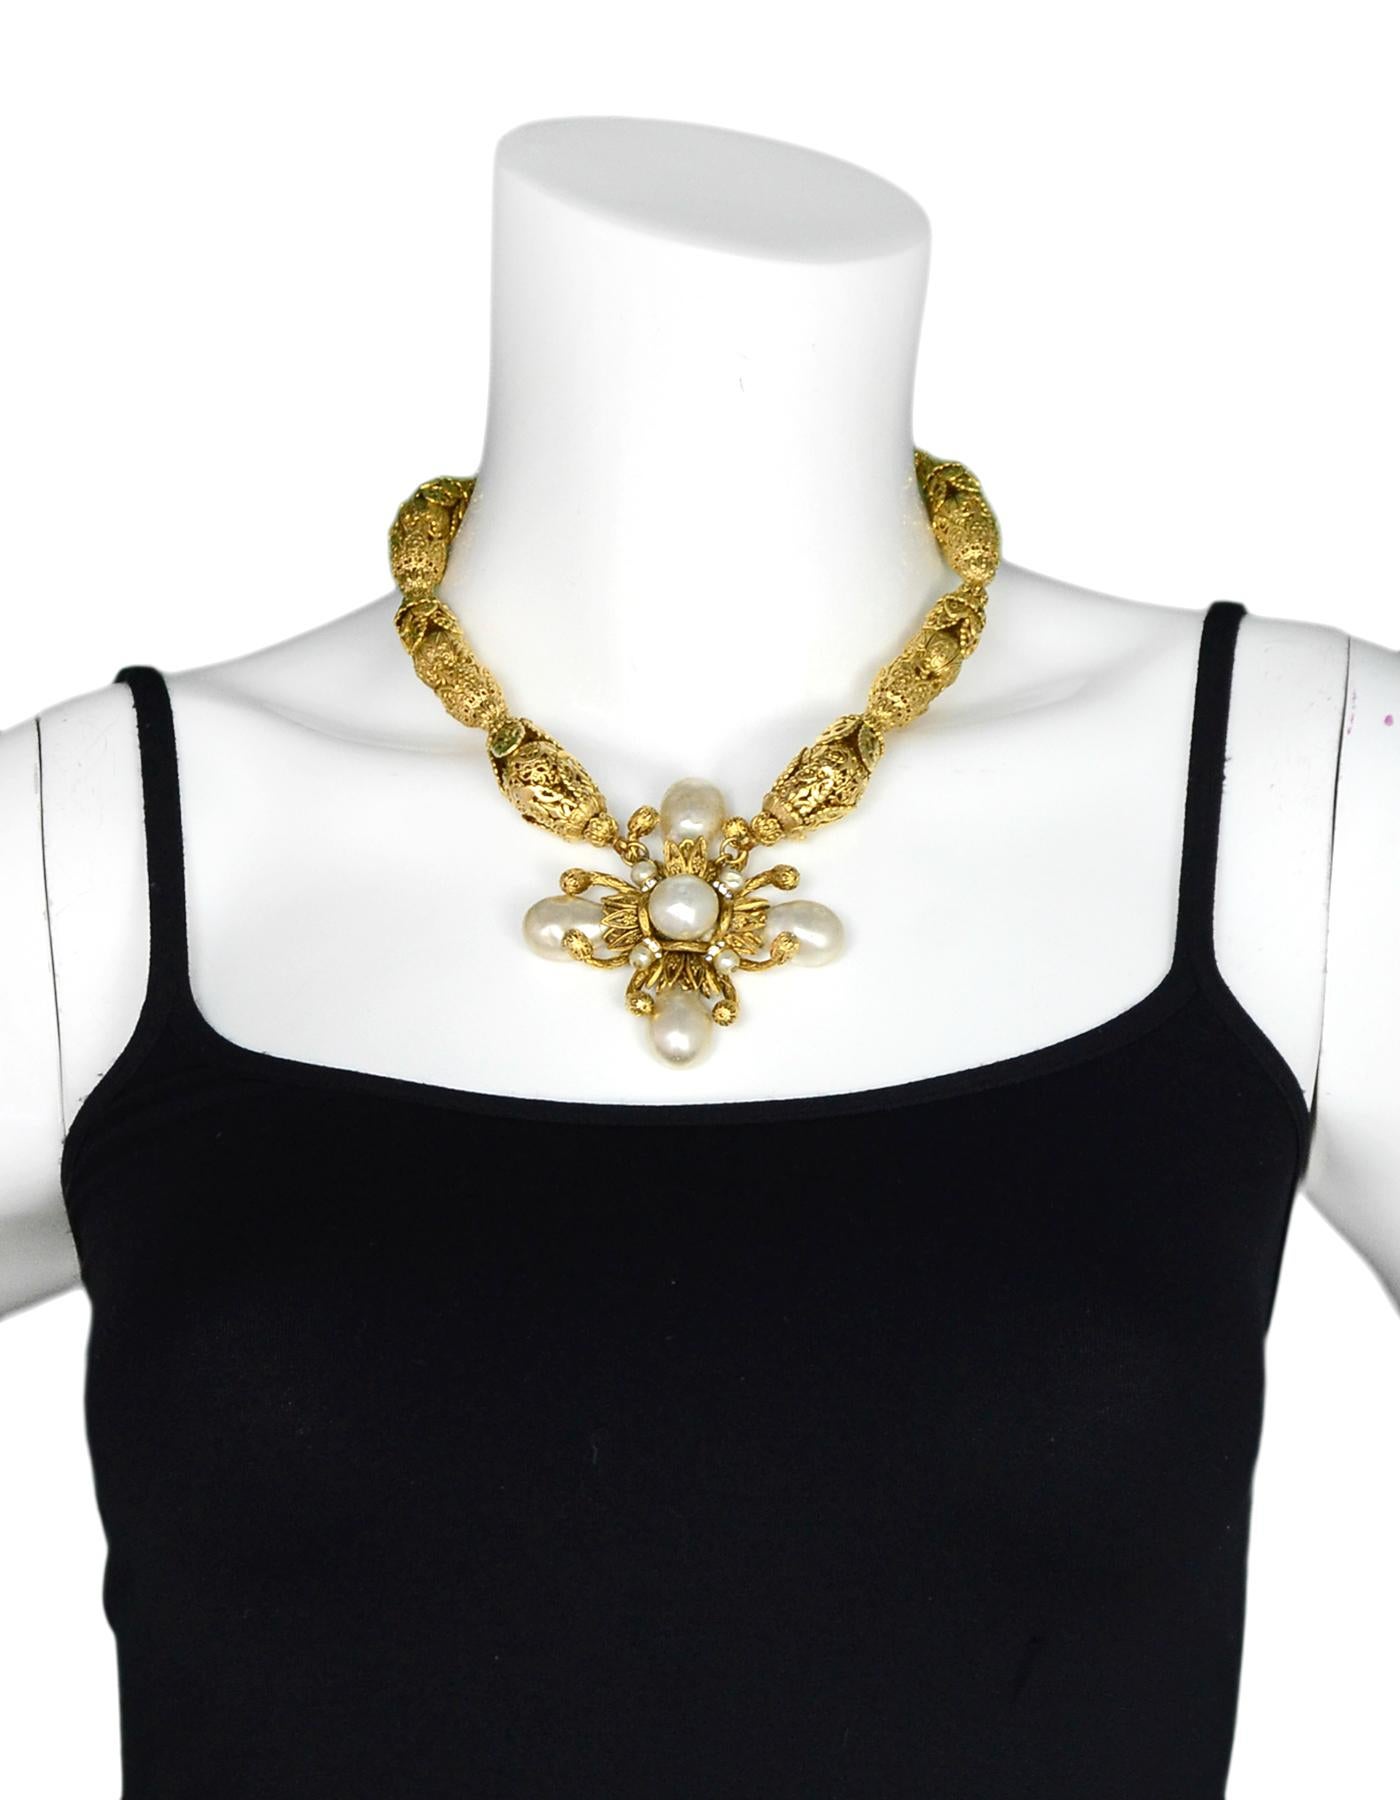 Chanel Gold Filigree Necklace W/ Faux Pearl Cross 

Color: Gold and white
Materials:  Goldtone metal and faux pearl
Hallmarks:   On back- 